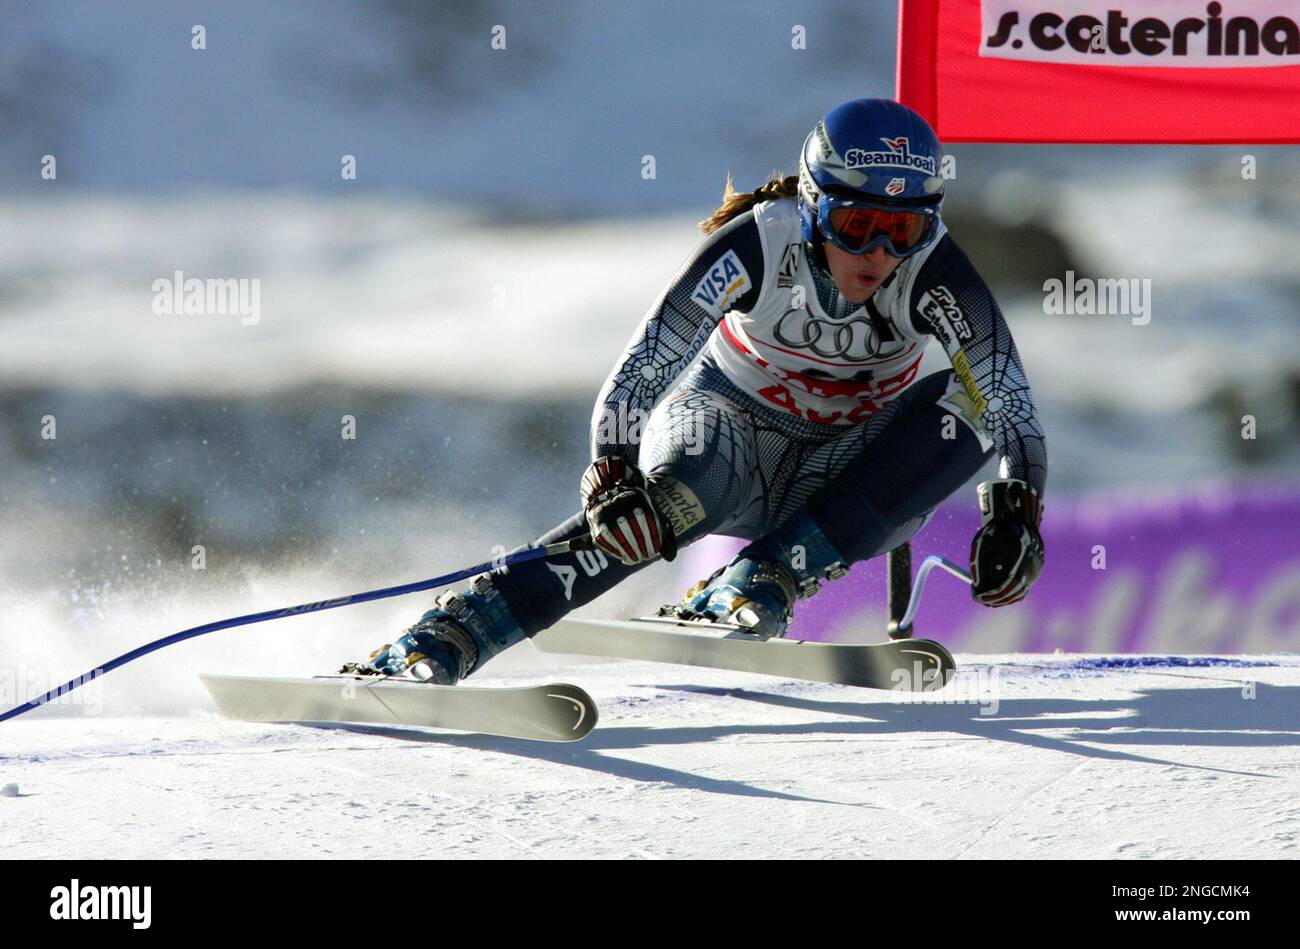 Caroline Lalive of the United States speeds down the course during the downhill portion of the Womens Combined at the World Alpine Ski Championships, in Santa Caterina Valfurva, Italy, Friday, Feb